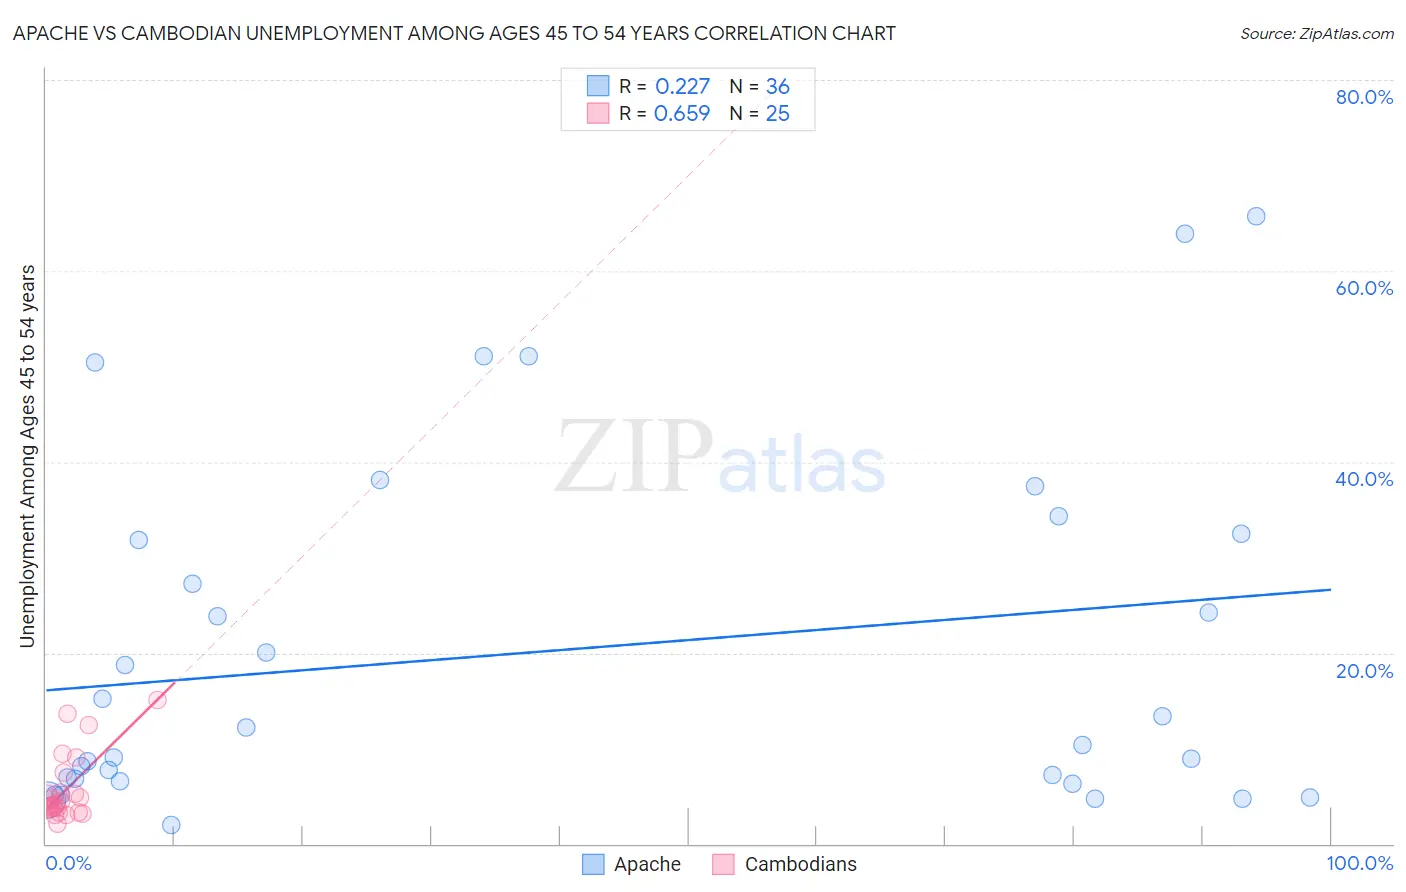 Apache vs Cambodian Unemployment Among Ages 45 to 54 years